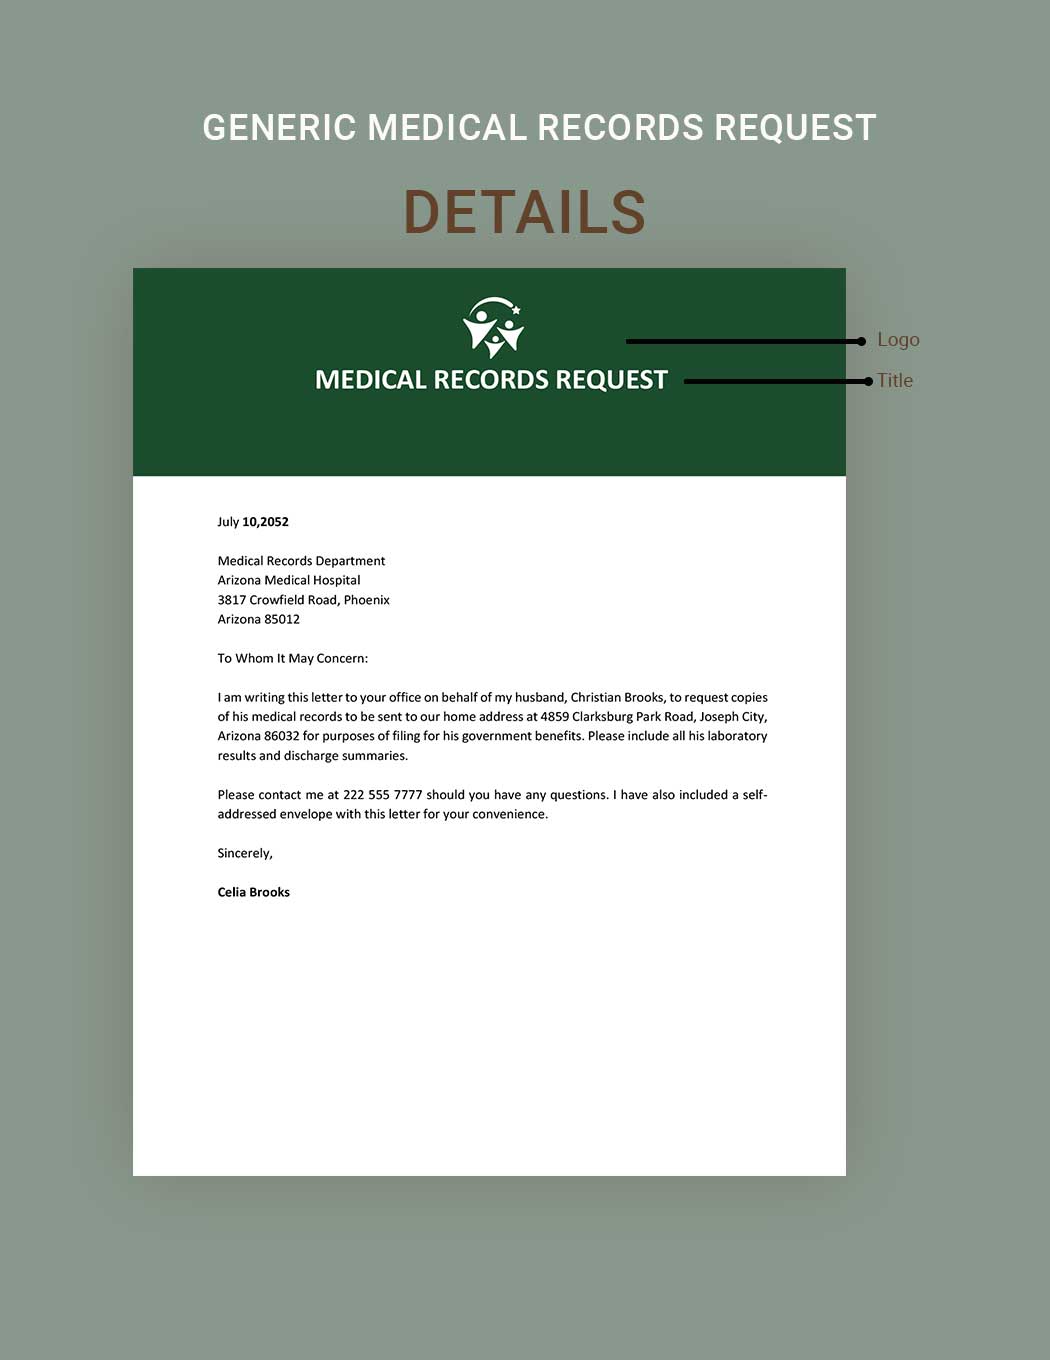 Generic Medical Records Request Example